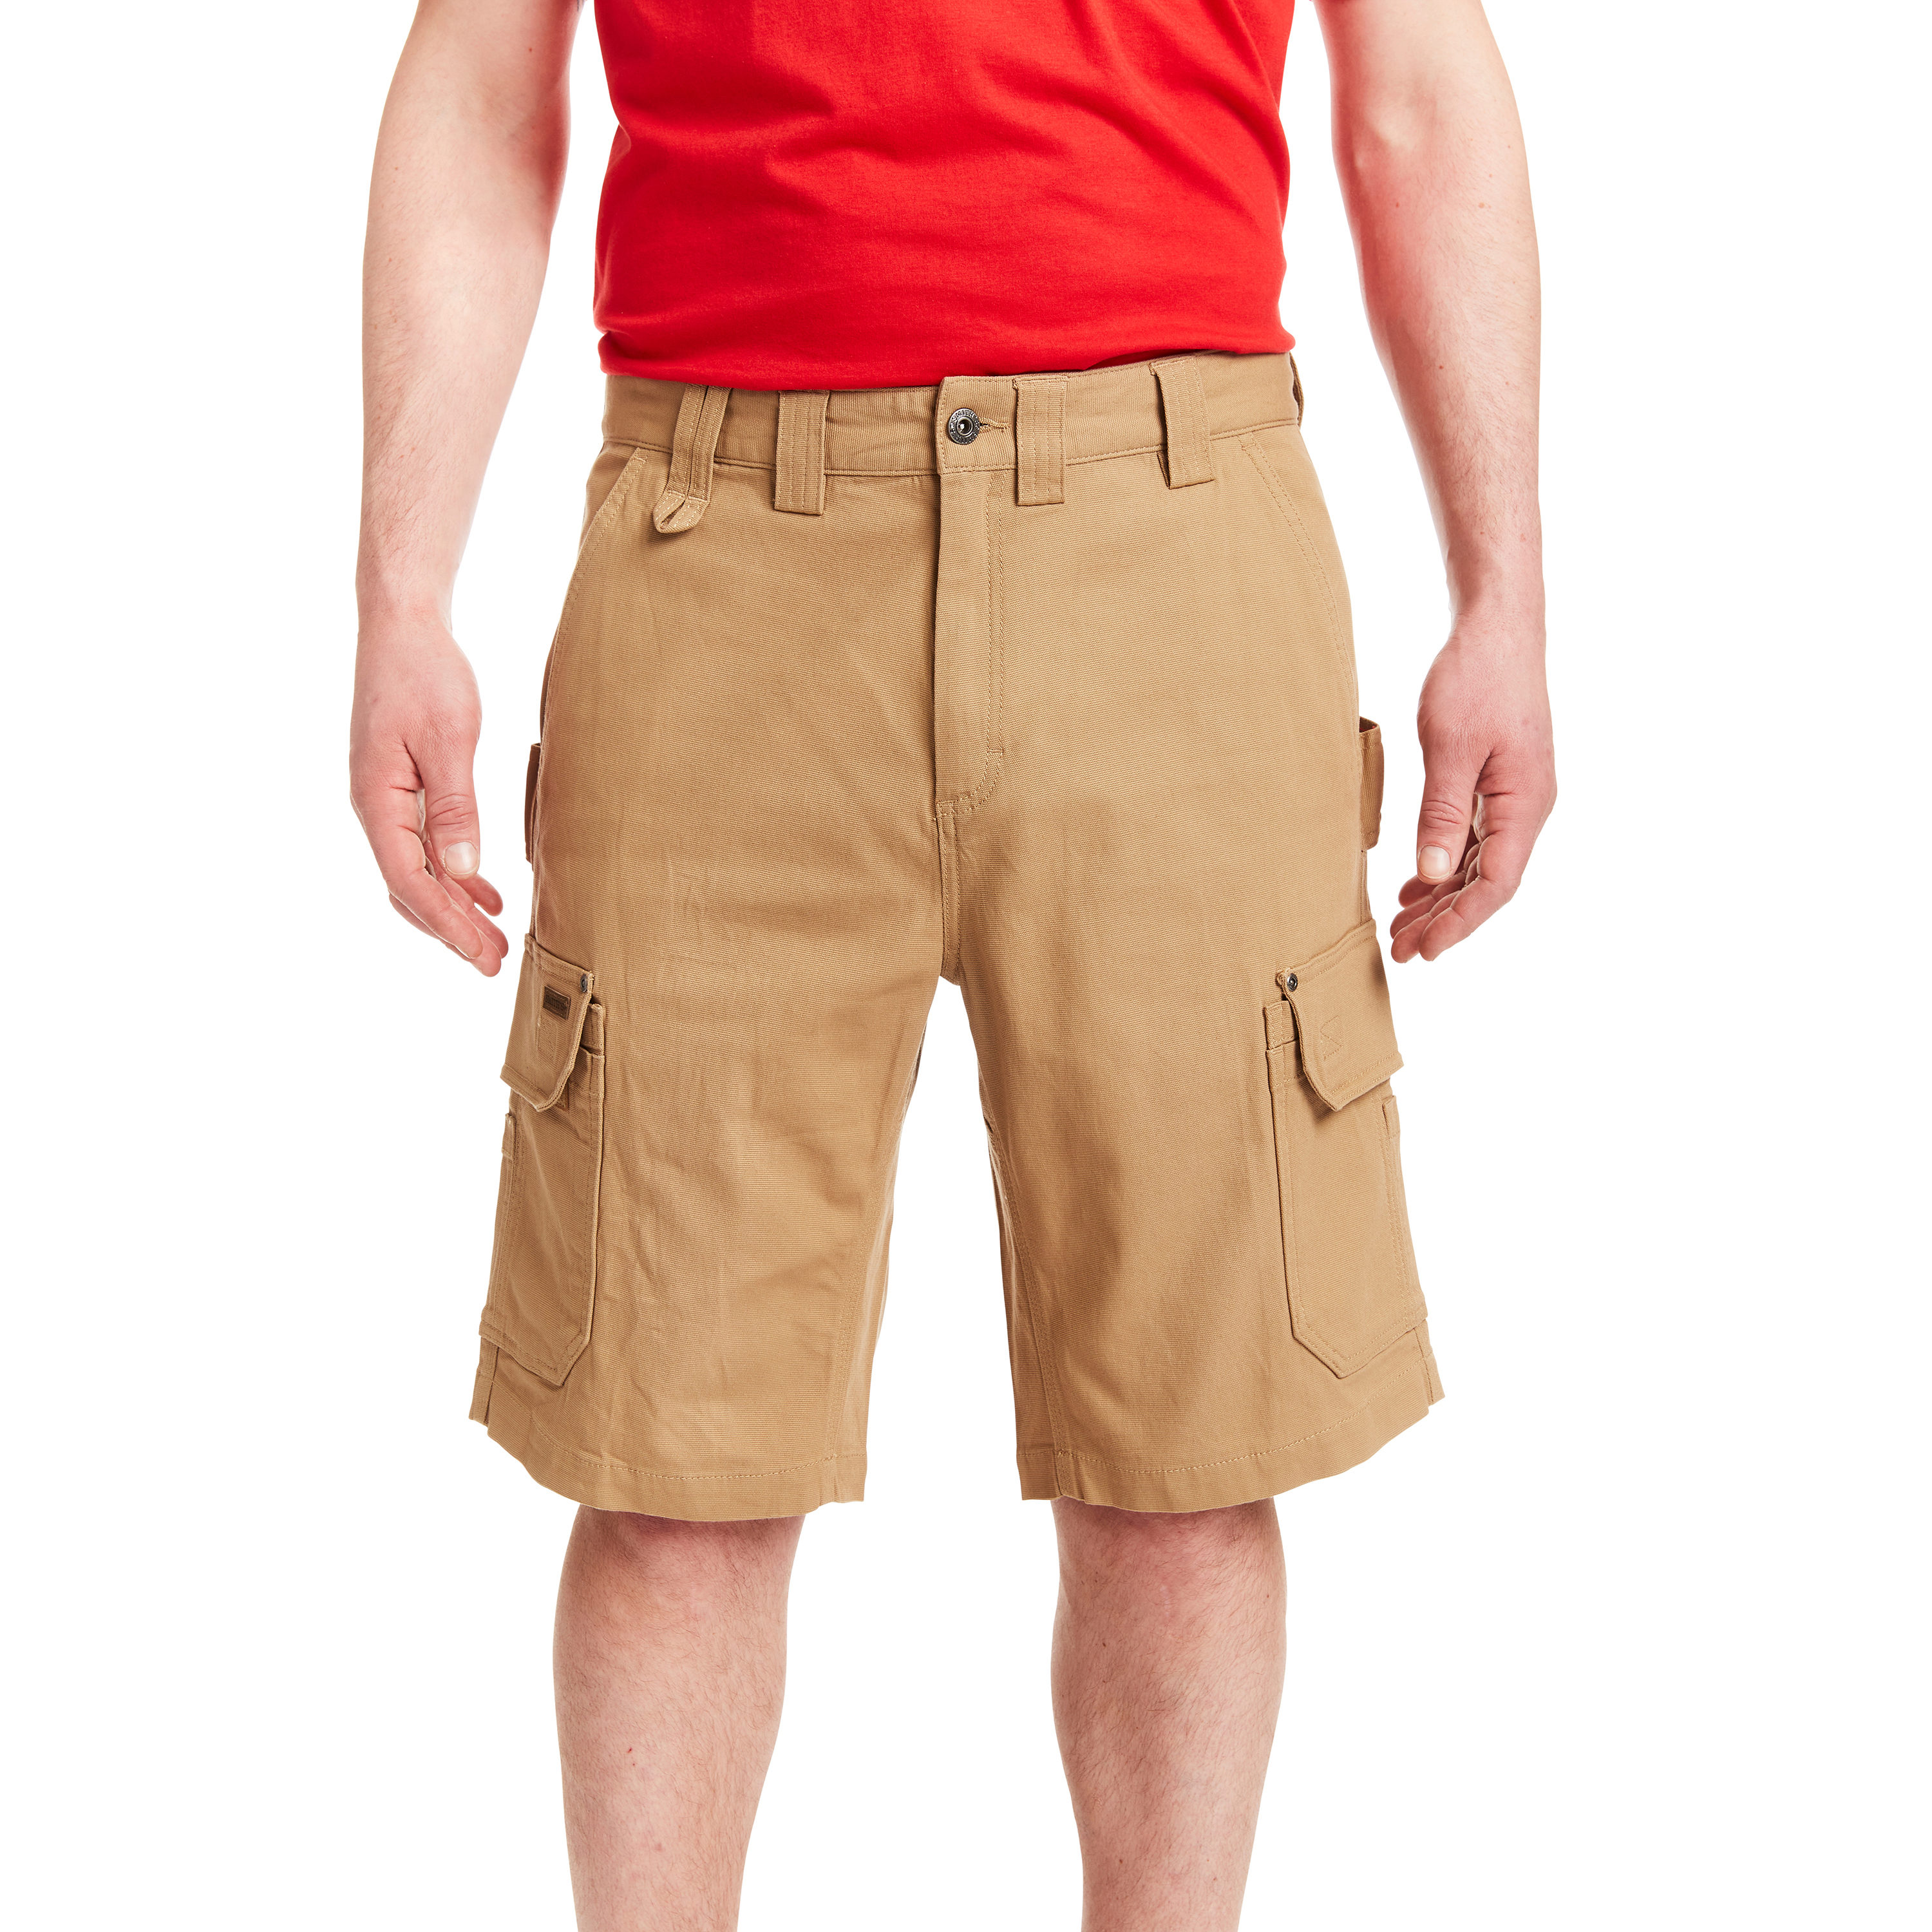 Smith's Workwear Khaki Canvas Work Shorts (34) in the Work Shorts department at Lowes.com